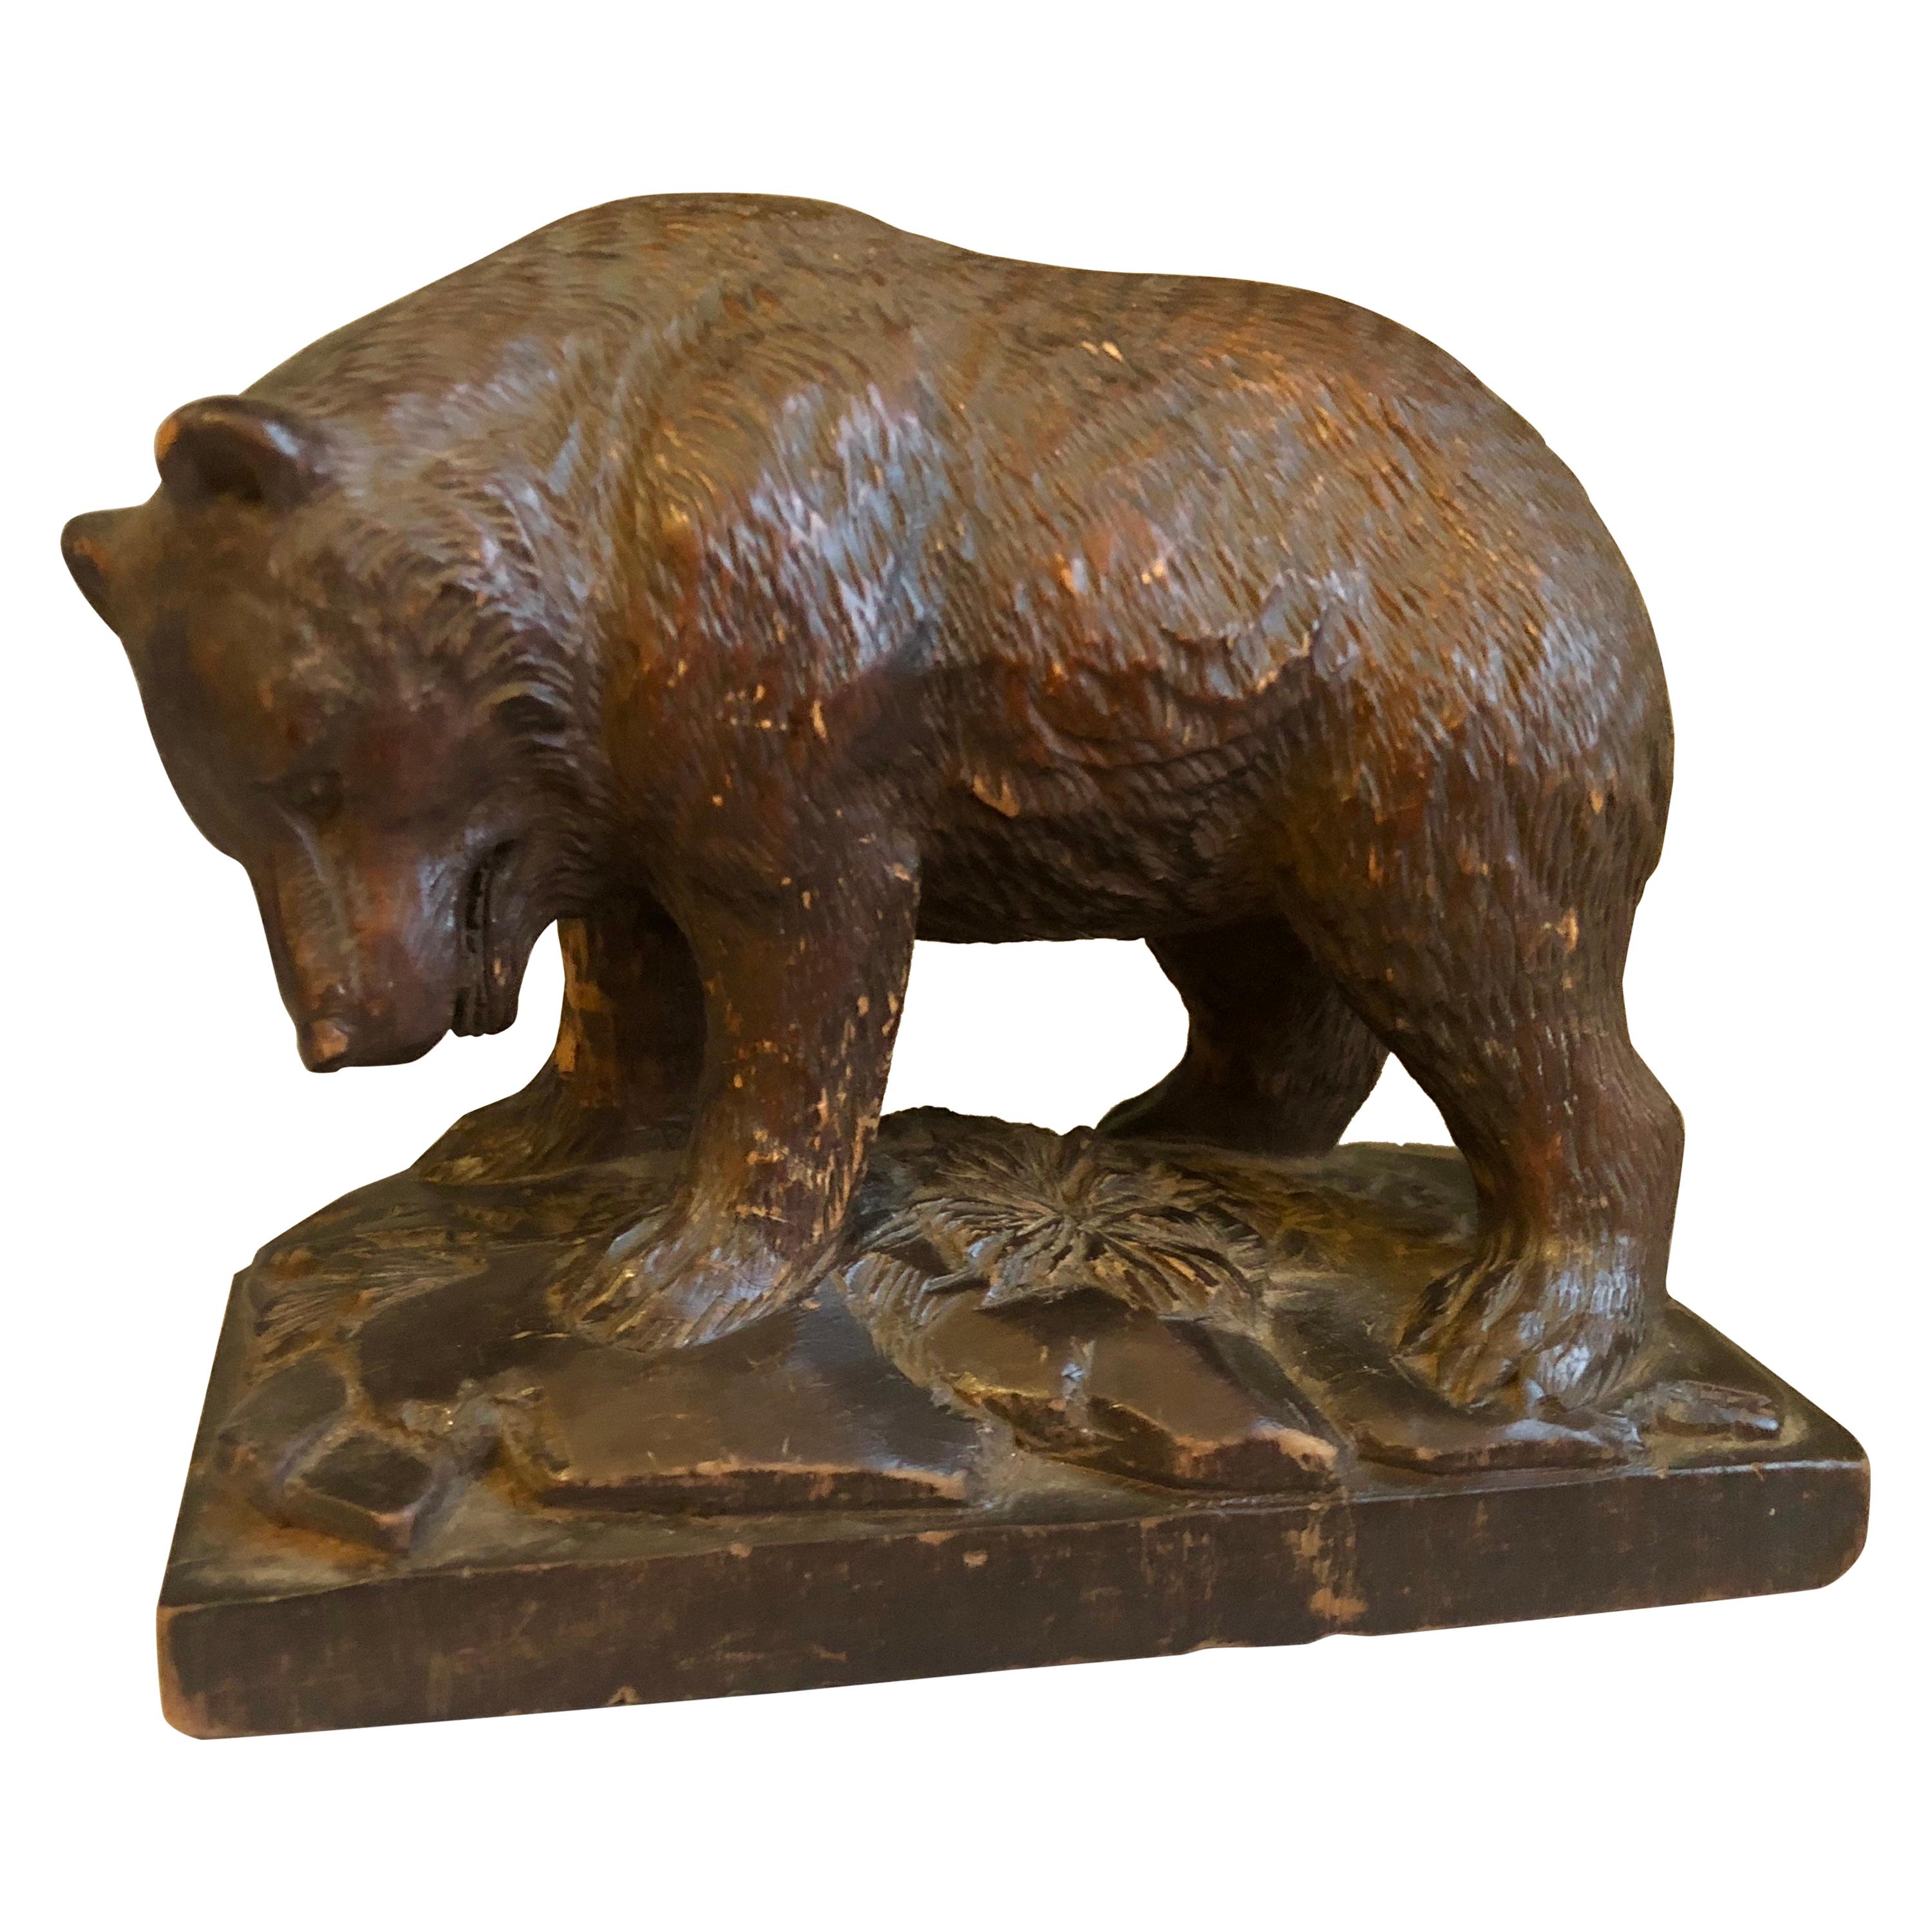 Small Black Forrest Carving of a Bear, 19th Century